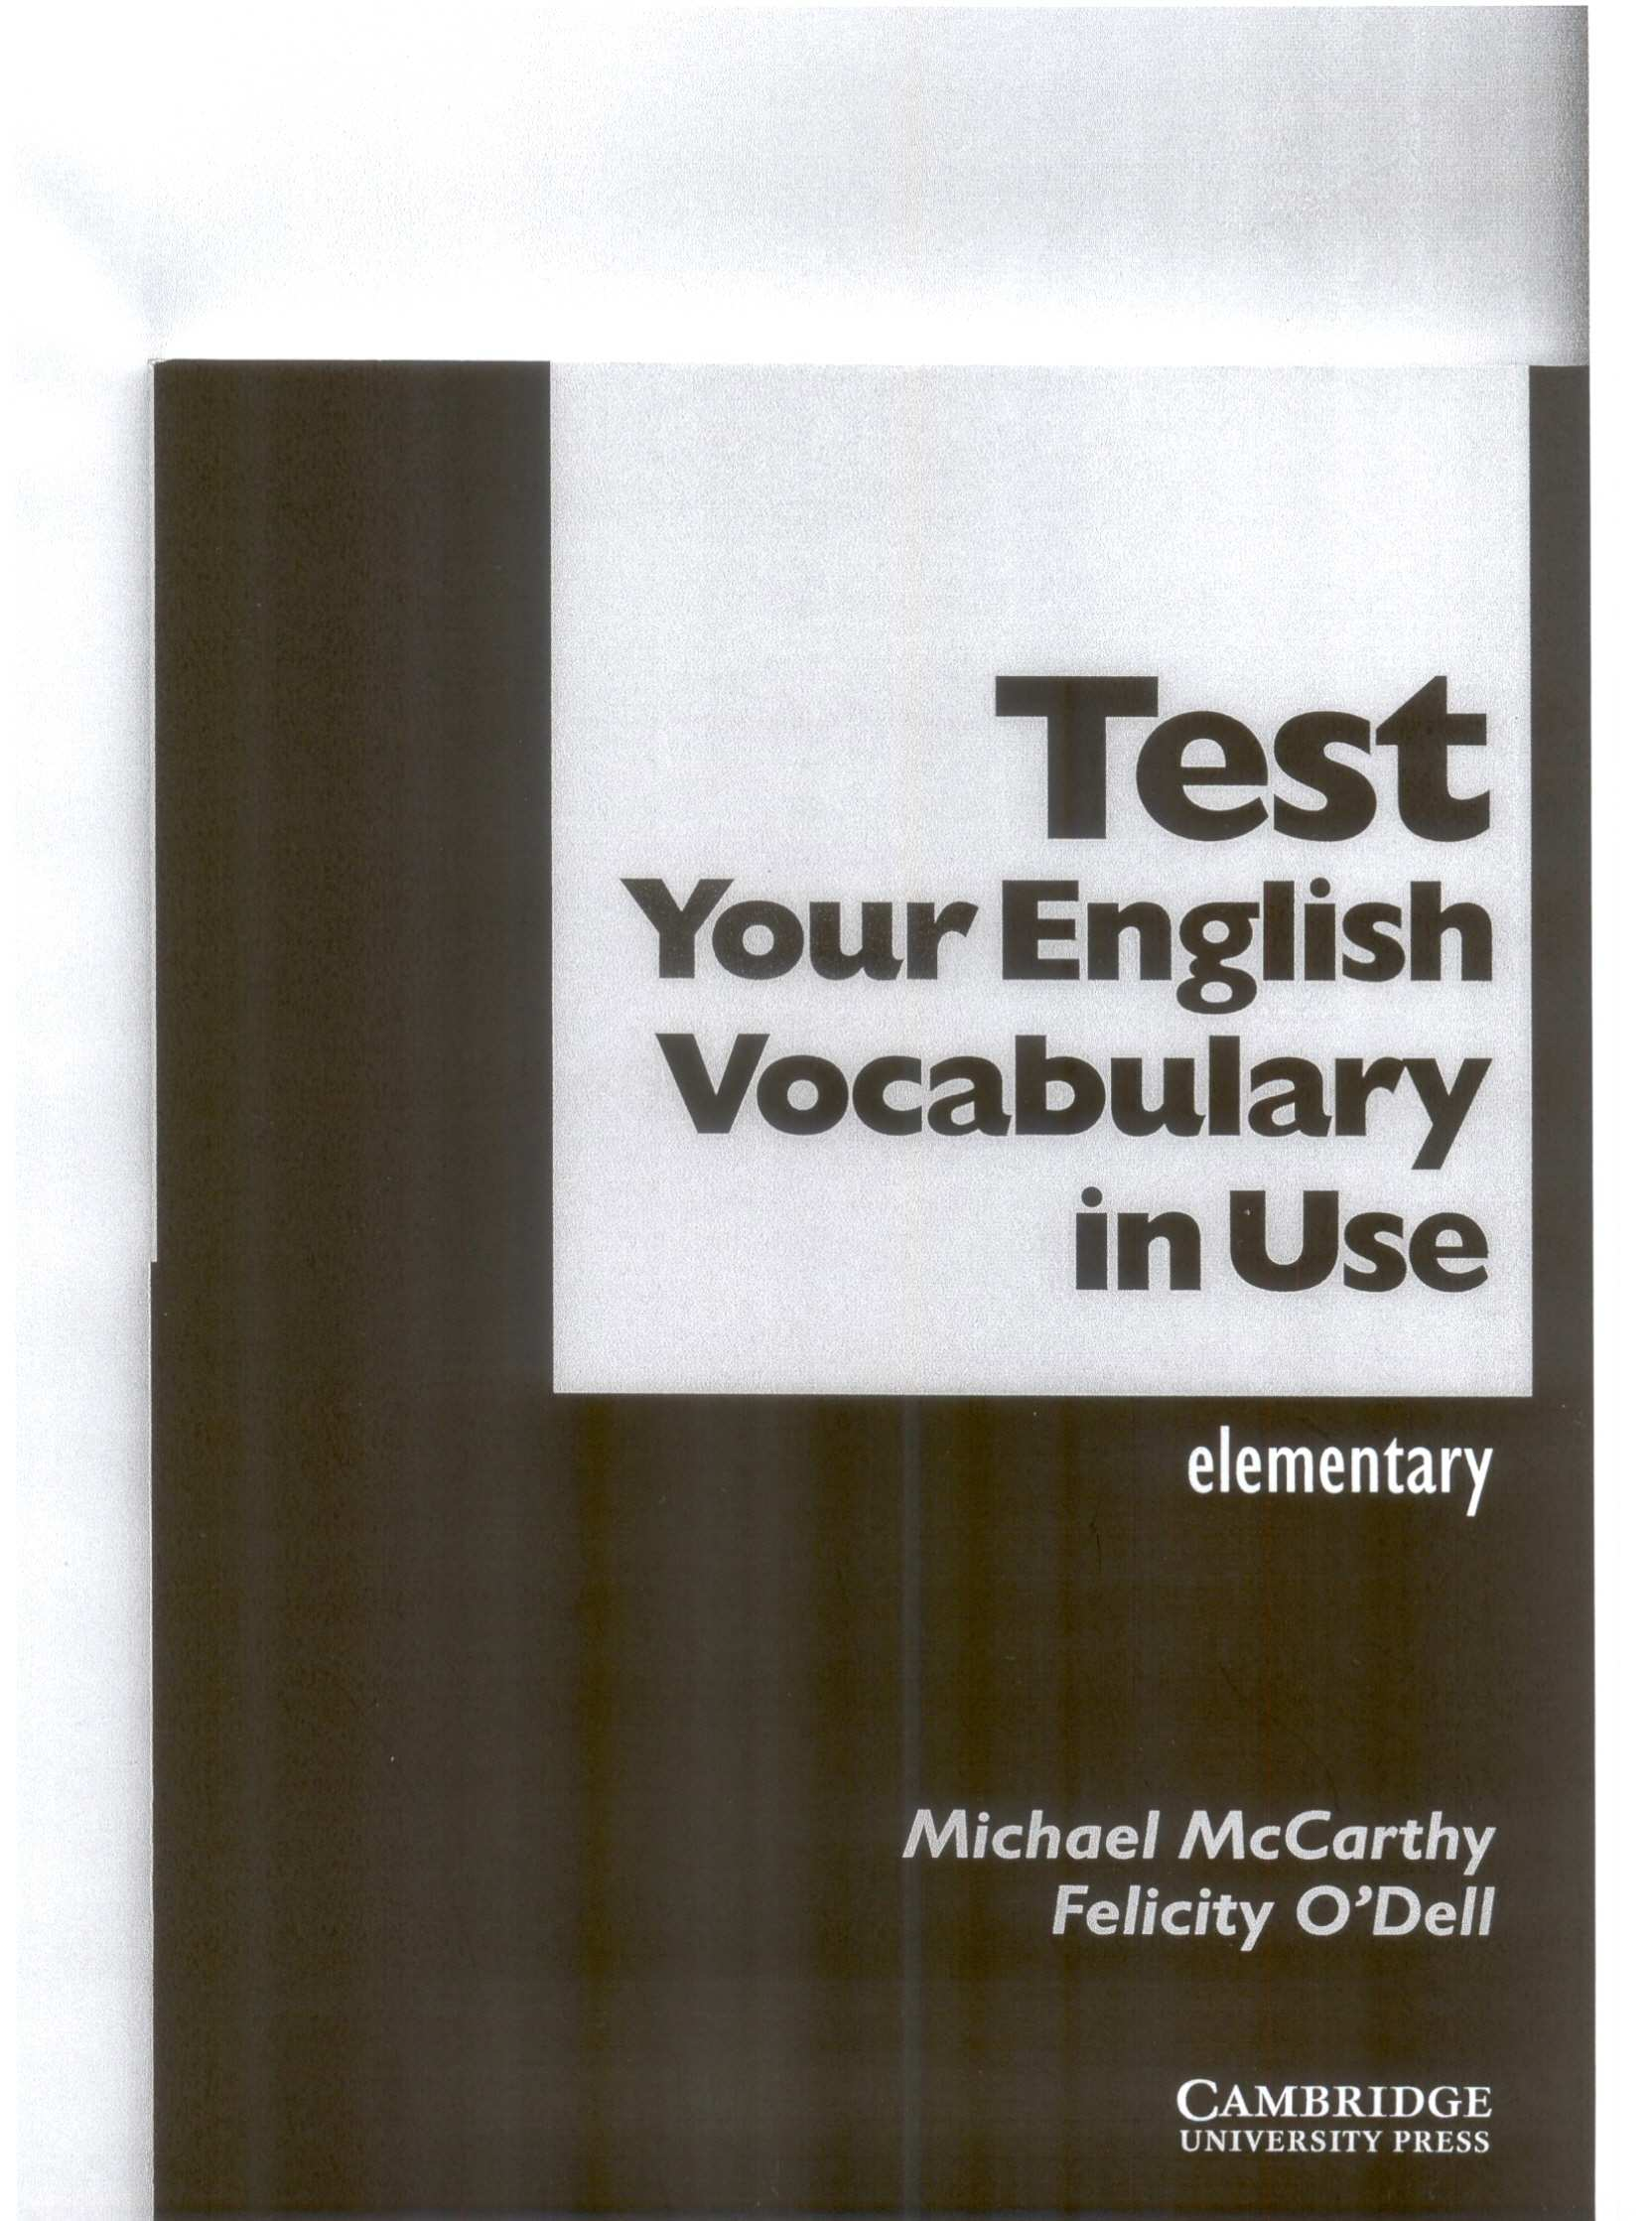 Test Your English Vocabulary in Use Elementary Edition with answers